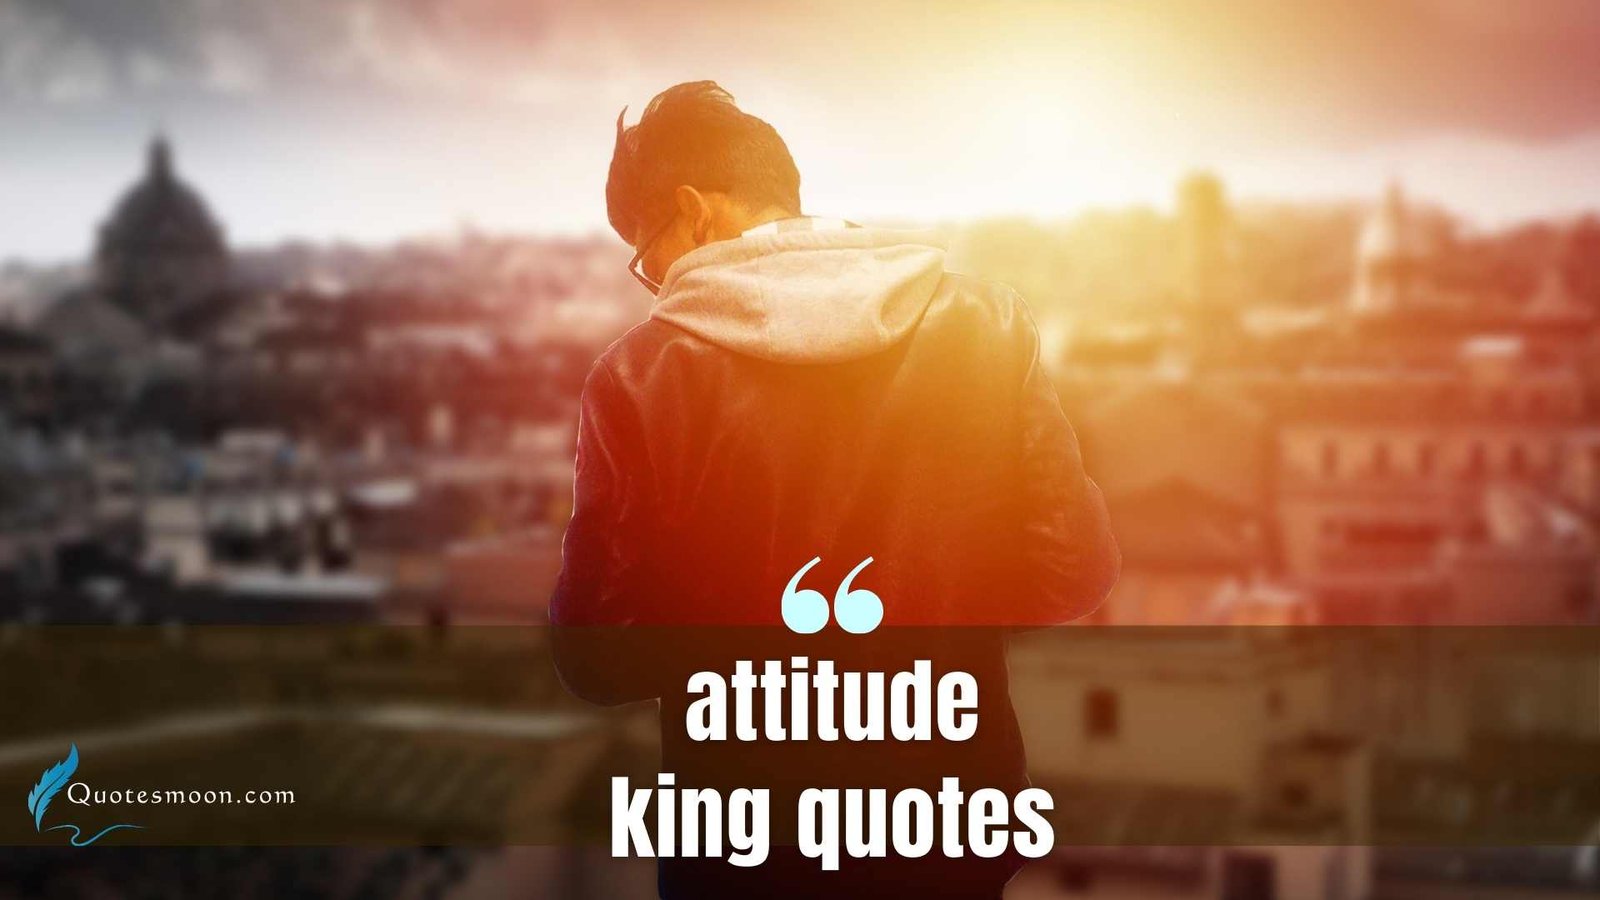 attitude king quotes images